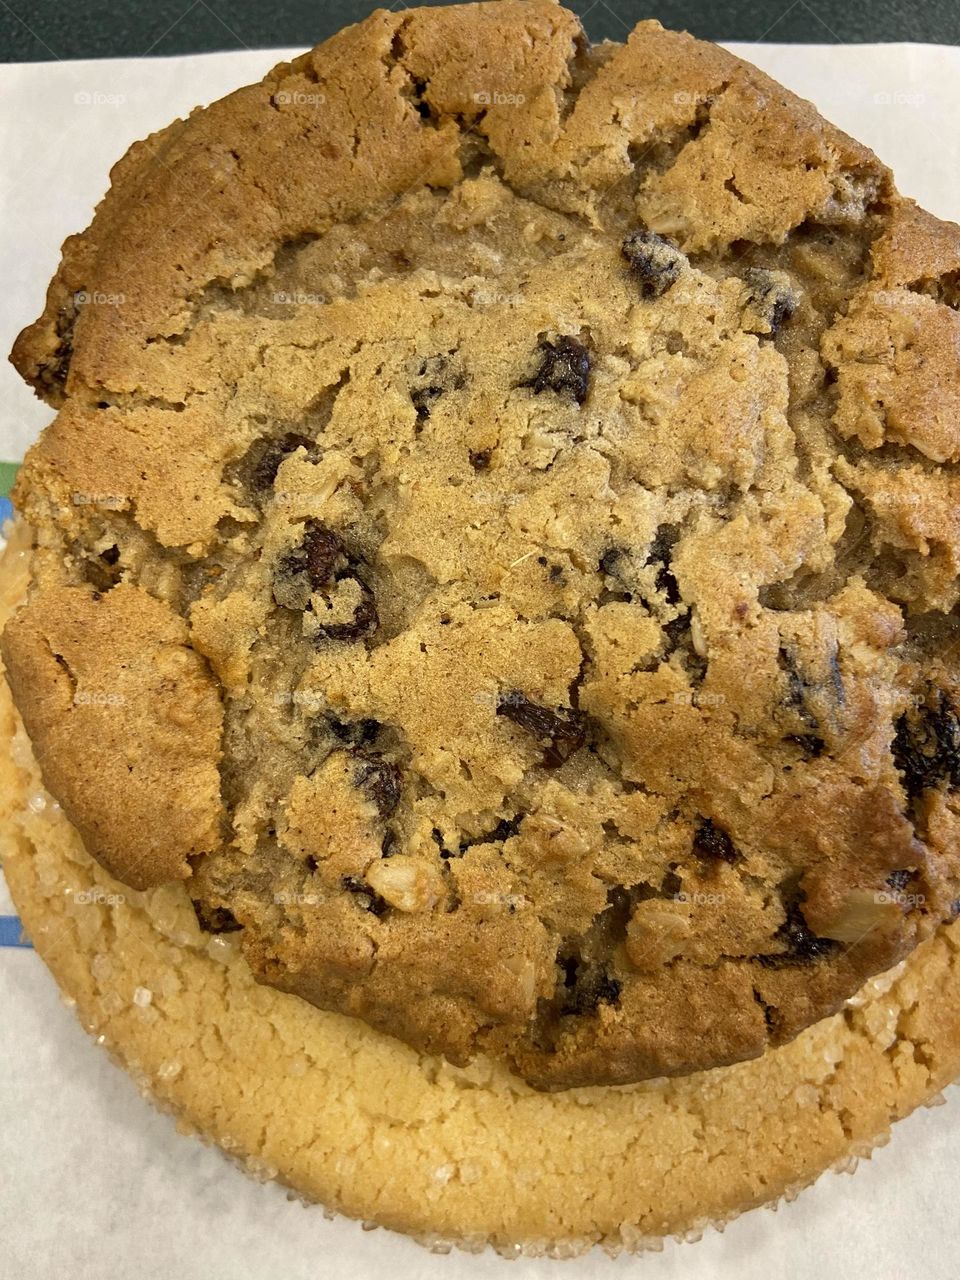 Two cookies are better than one, especially if they are “Buy one, get one 50% off” as they were when I visited the cafe at Barnes & Noble bookstore. I went in for my favorite sugar cookie but got an oatmeal raisin too. Both are delicious. 